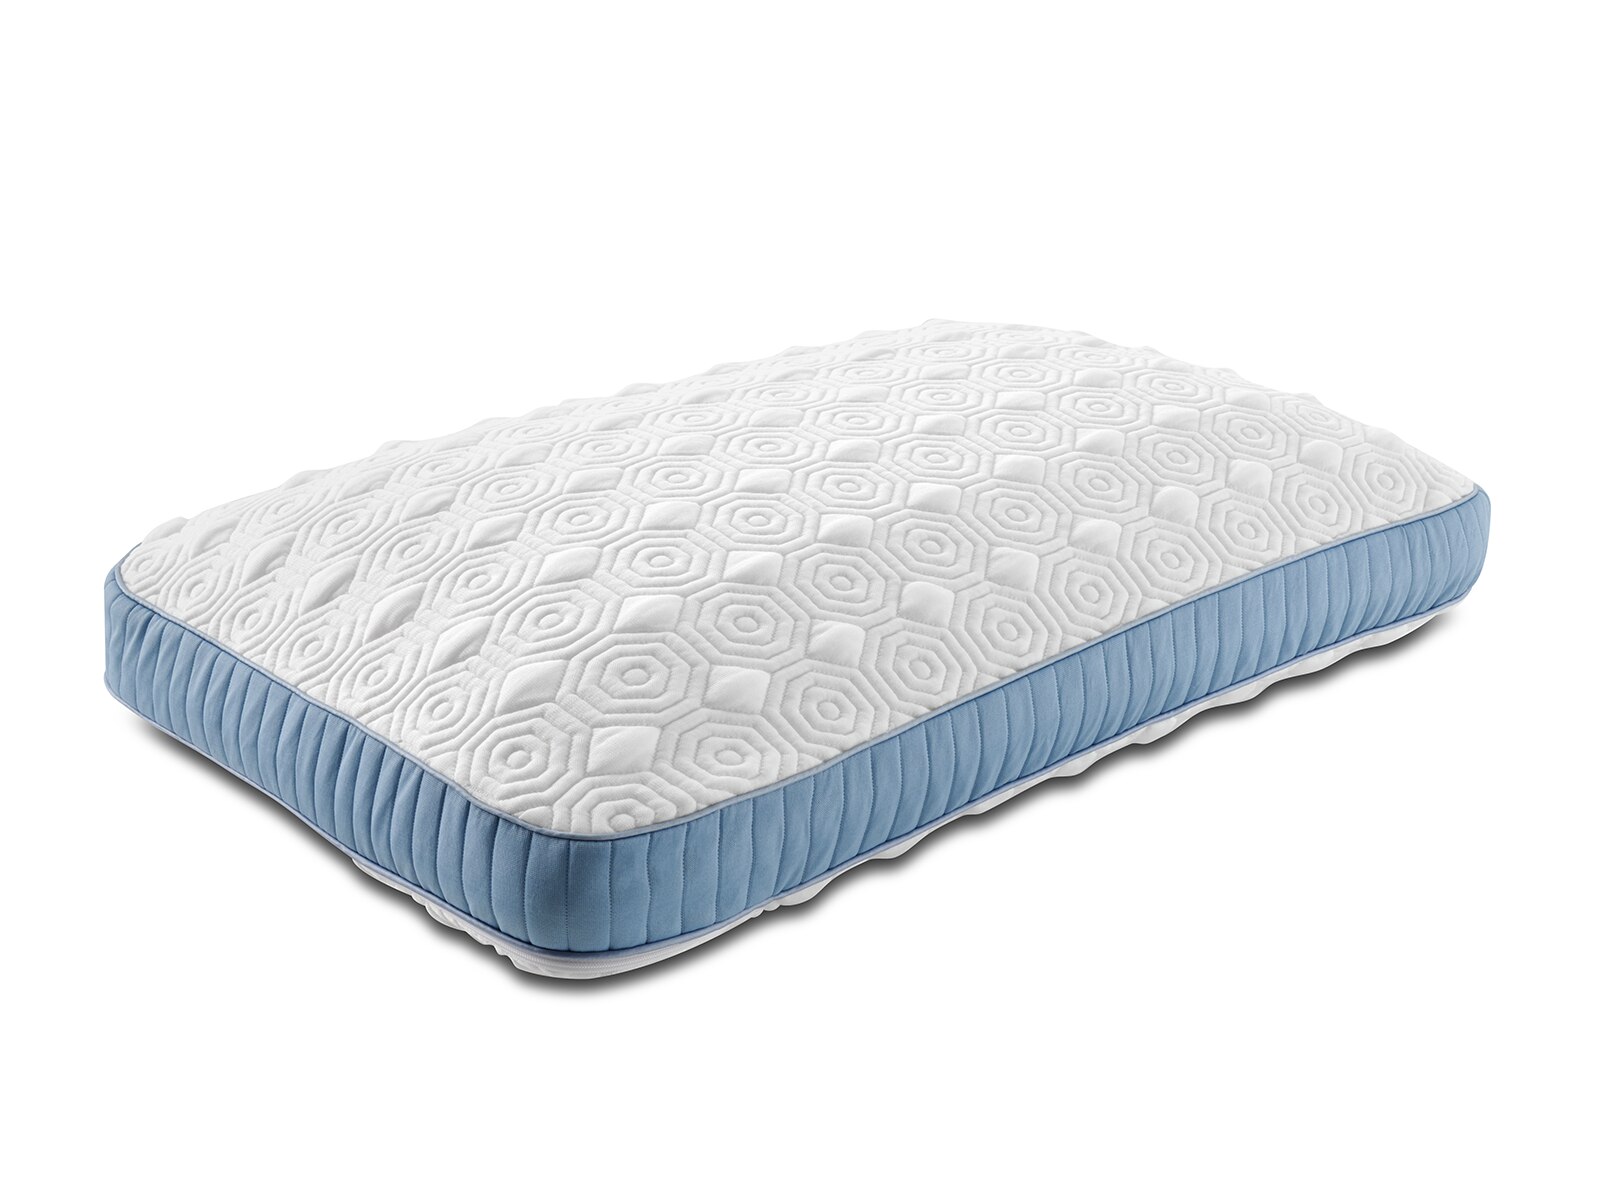 stearns and foster latex mattress complaints